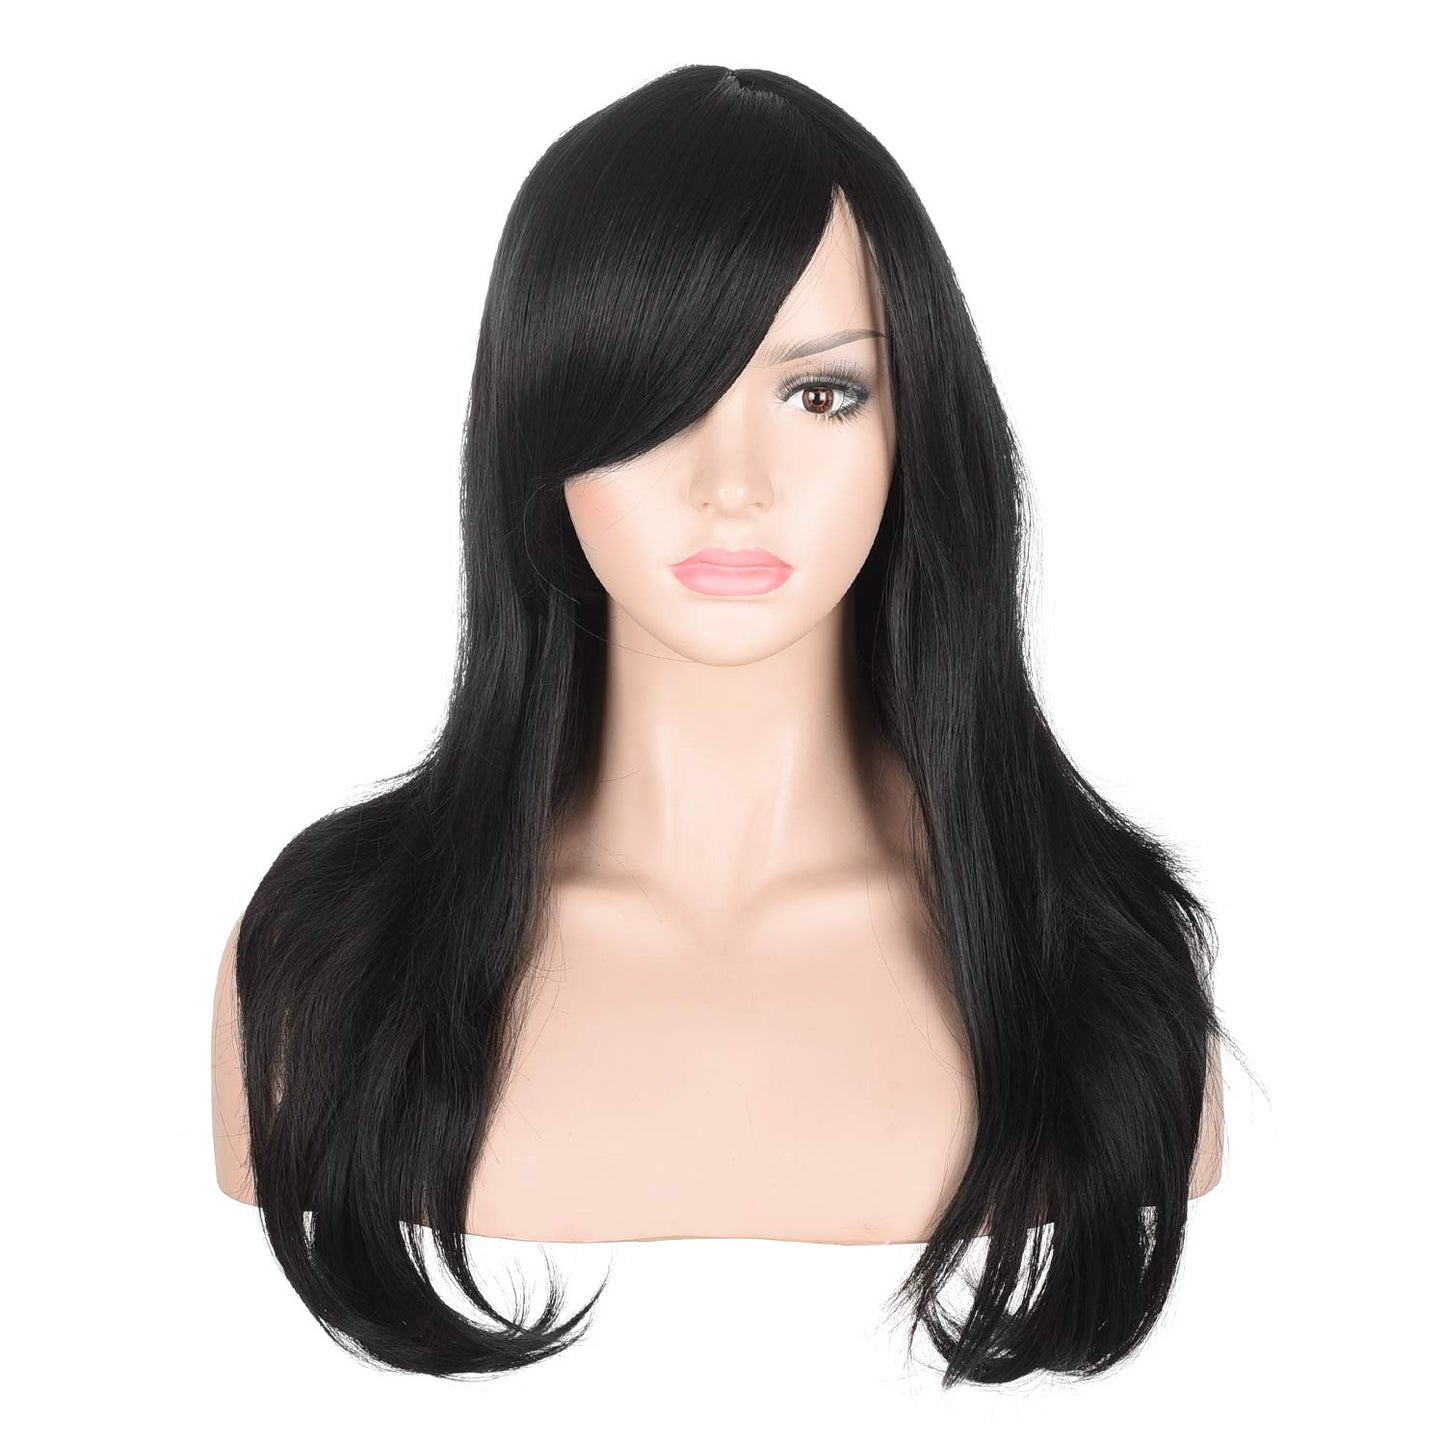 Lush Locks 23" Long Wig Big Wavy Heat Resistant Synthetic Straight Hair with Bangs